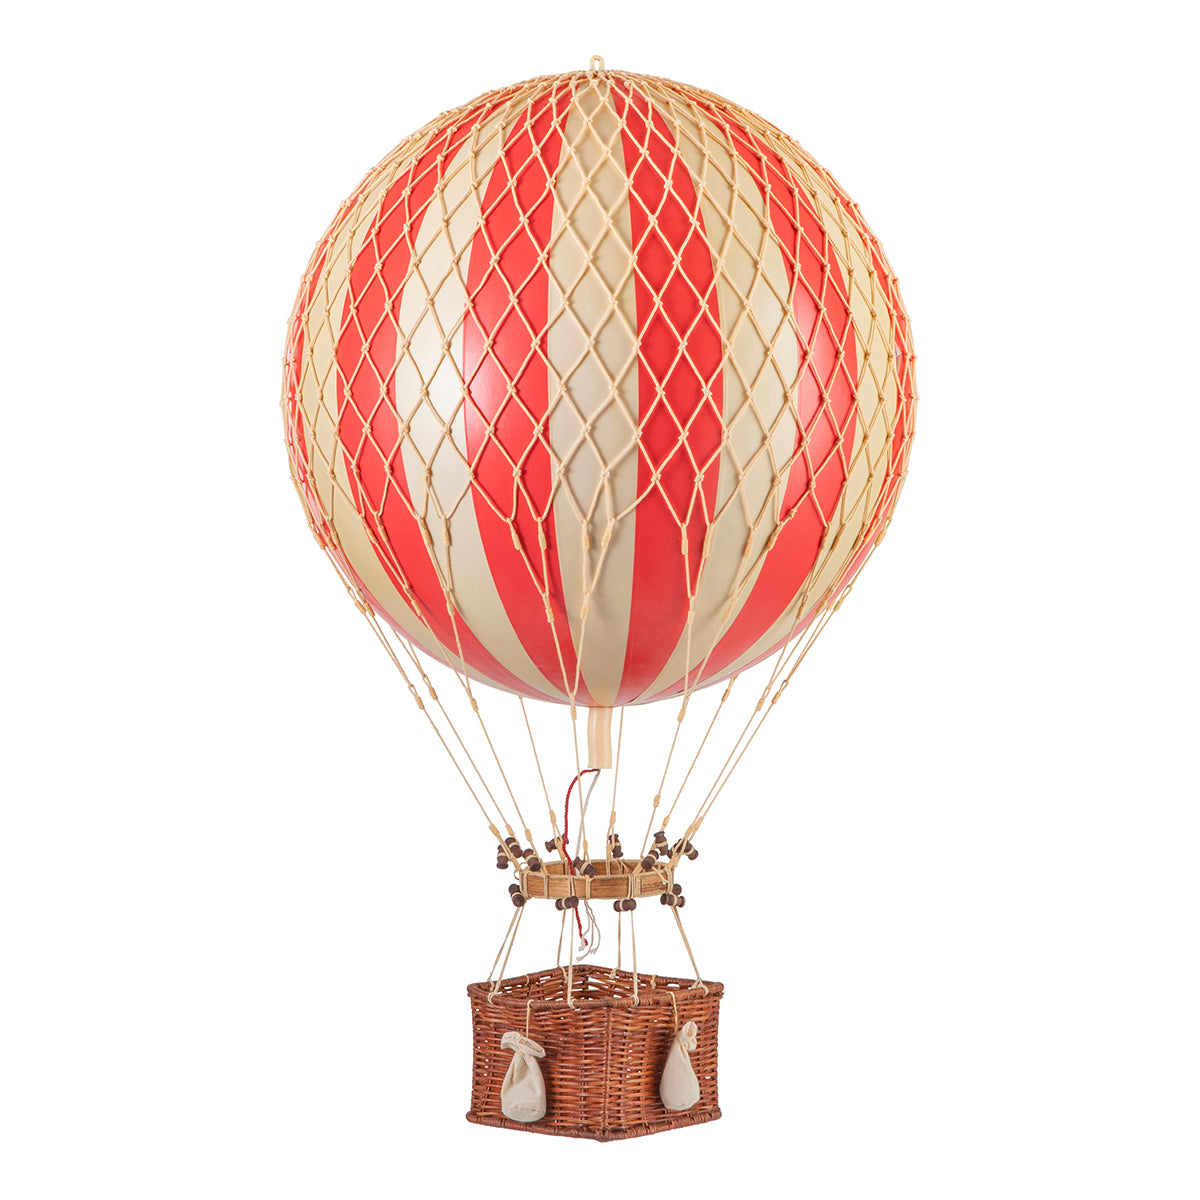 A Wonderen Large Hot Air Balloon - Jules Verne, inspired by Jules Verne, floating on a serene white background as a captivating decoration.